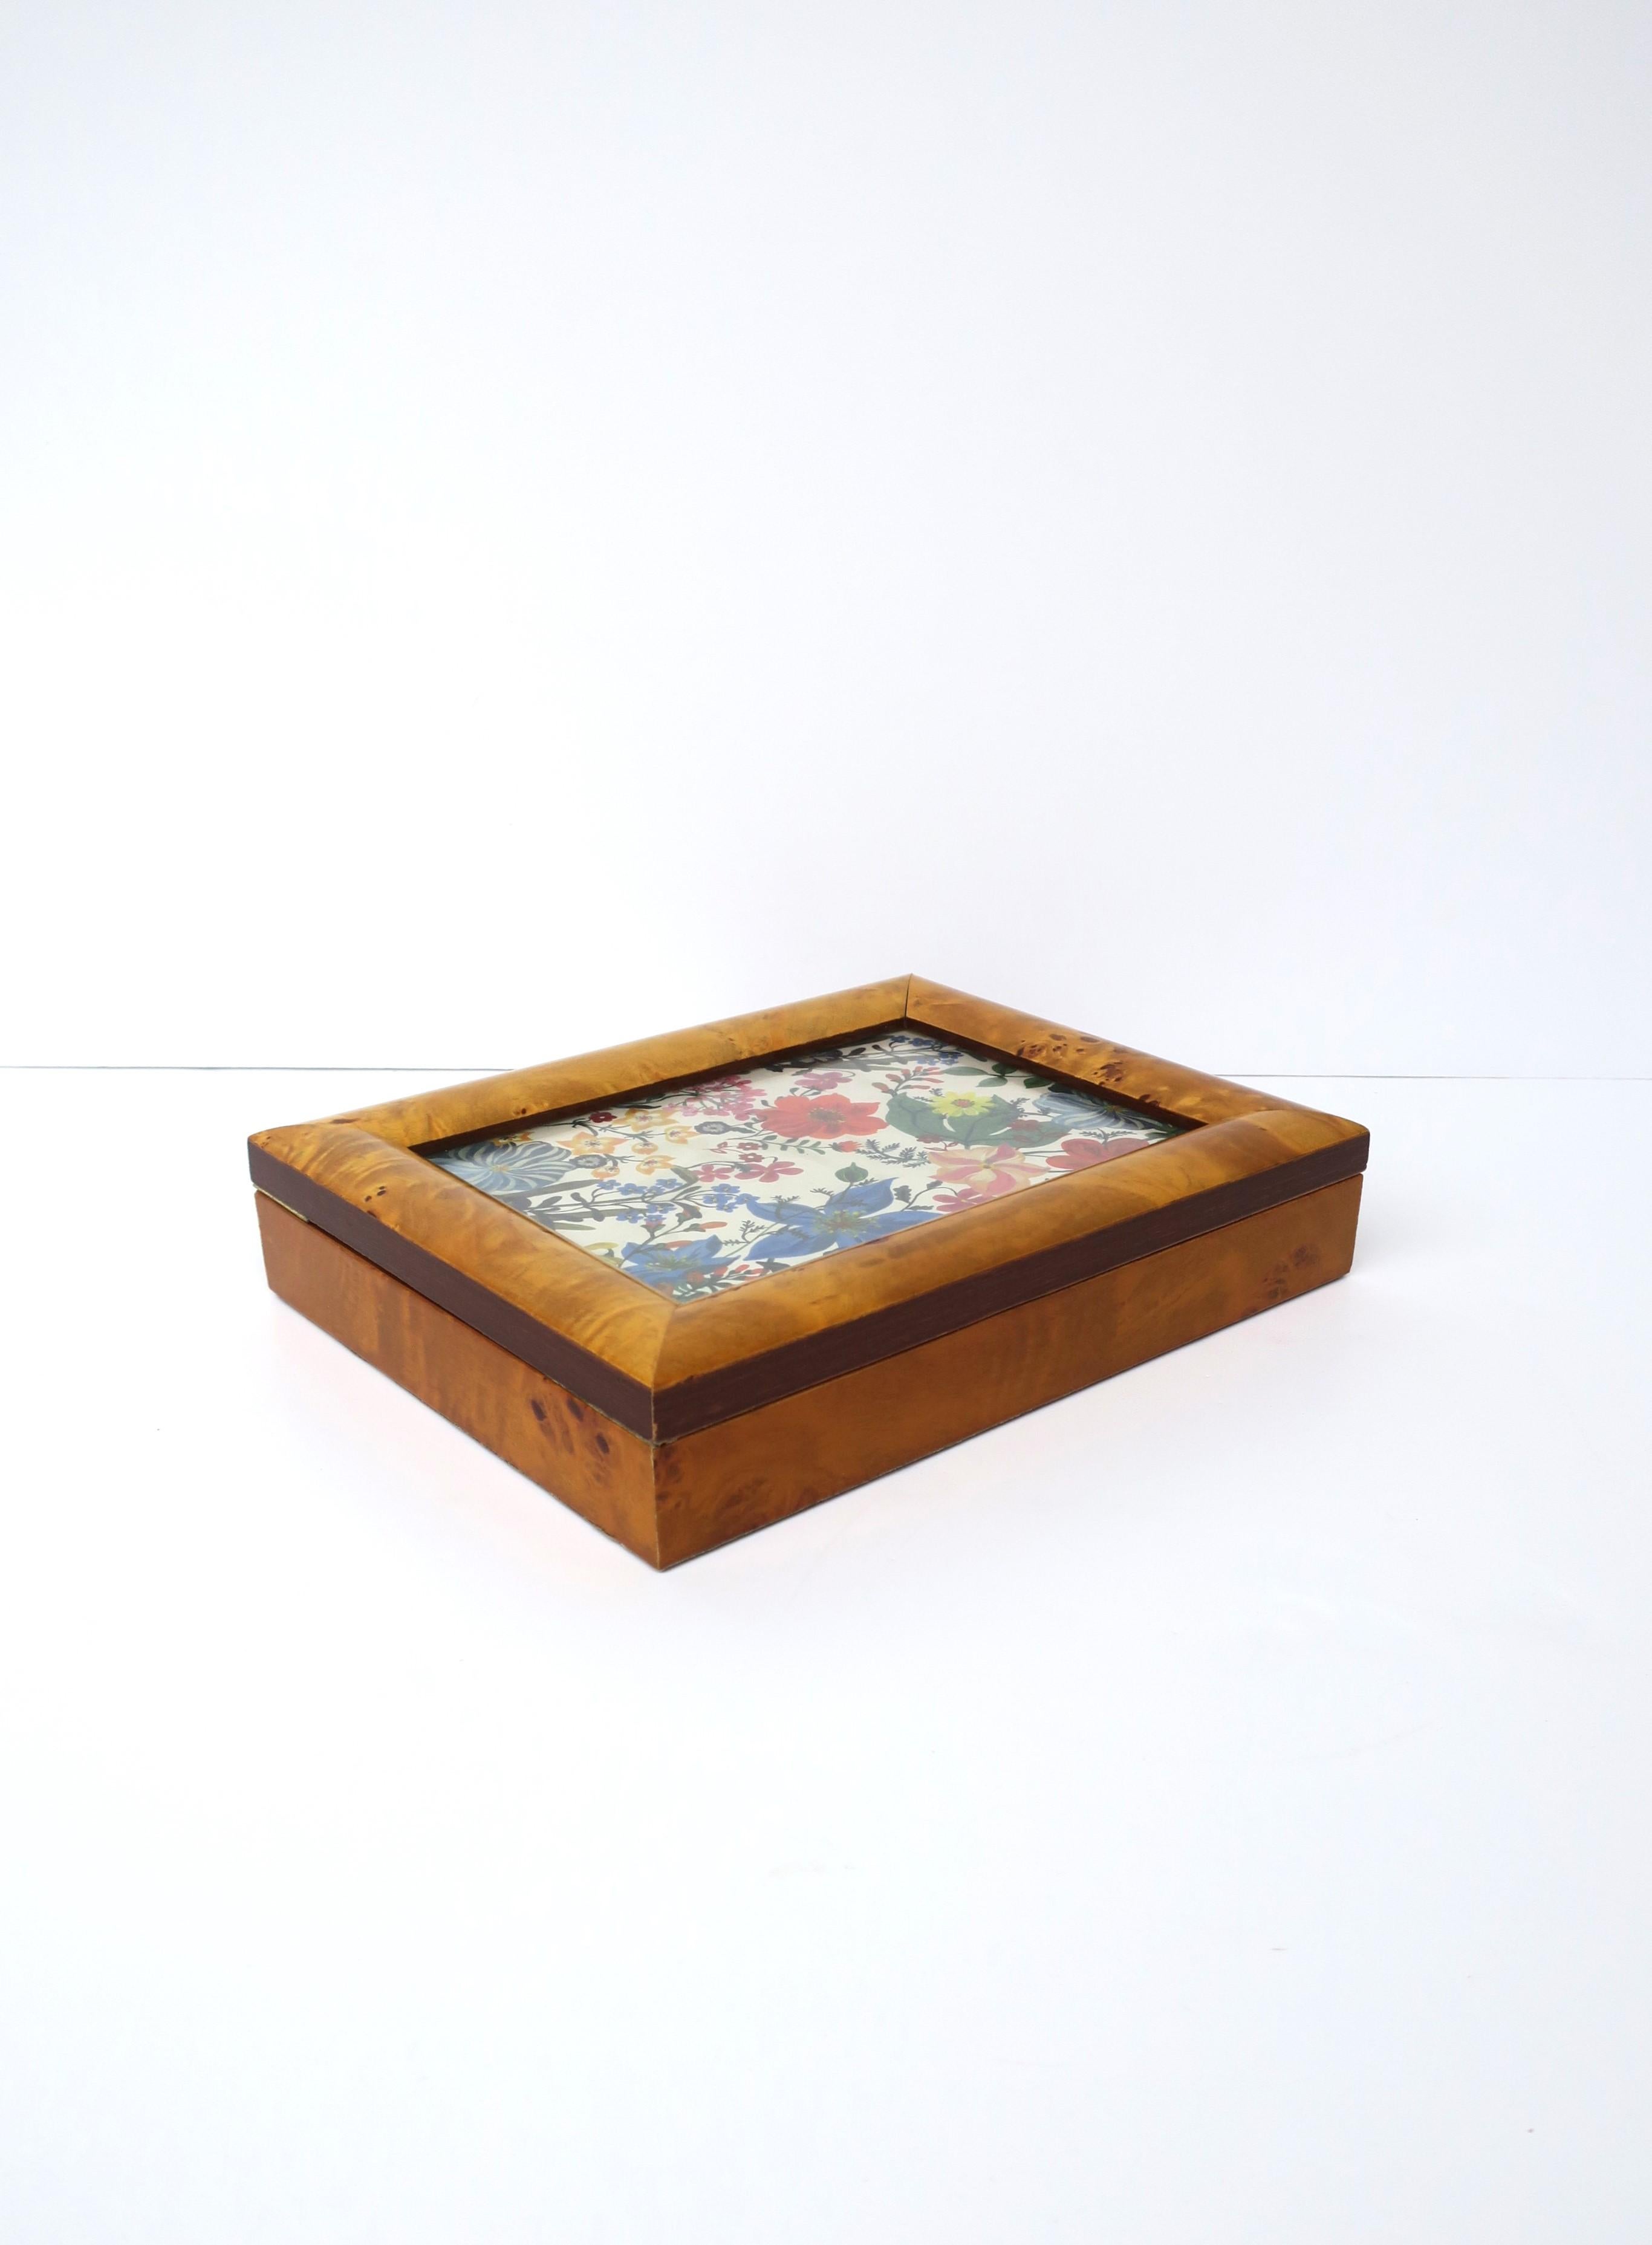 A burl wood box with picture frame/lid, circa mid-20th century. A beautiful box to hold jewelry for other items on a desk, vanity, sideboard, etc. Lid is a burl wood veneer, with brass hinge, also doubles as a picture frame (with glass protective